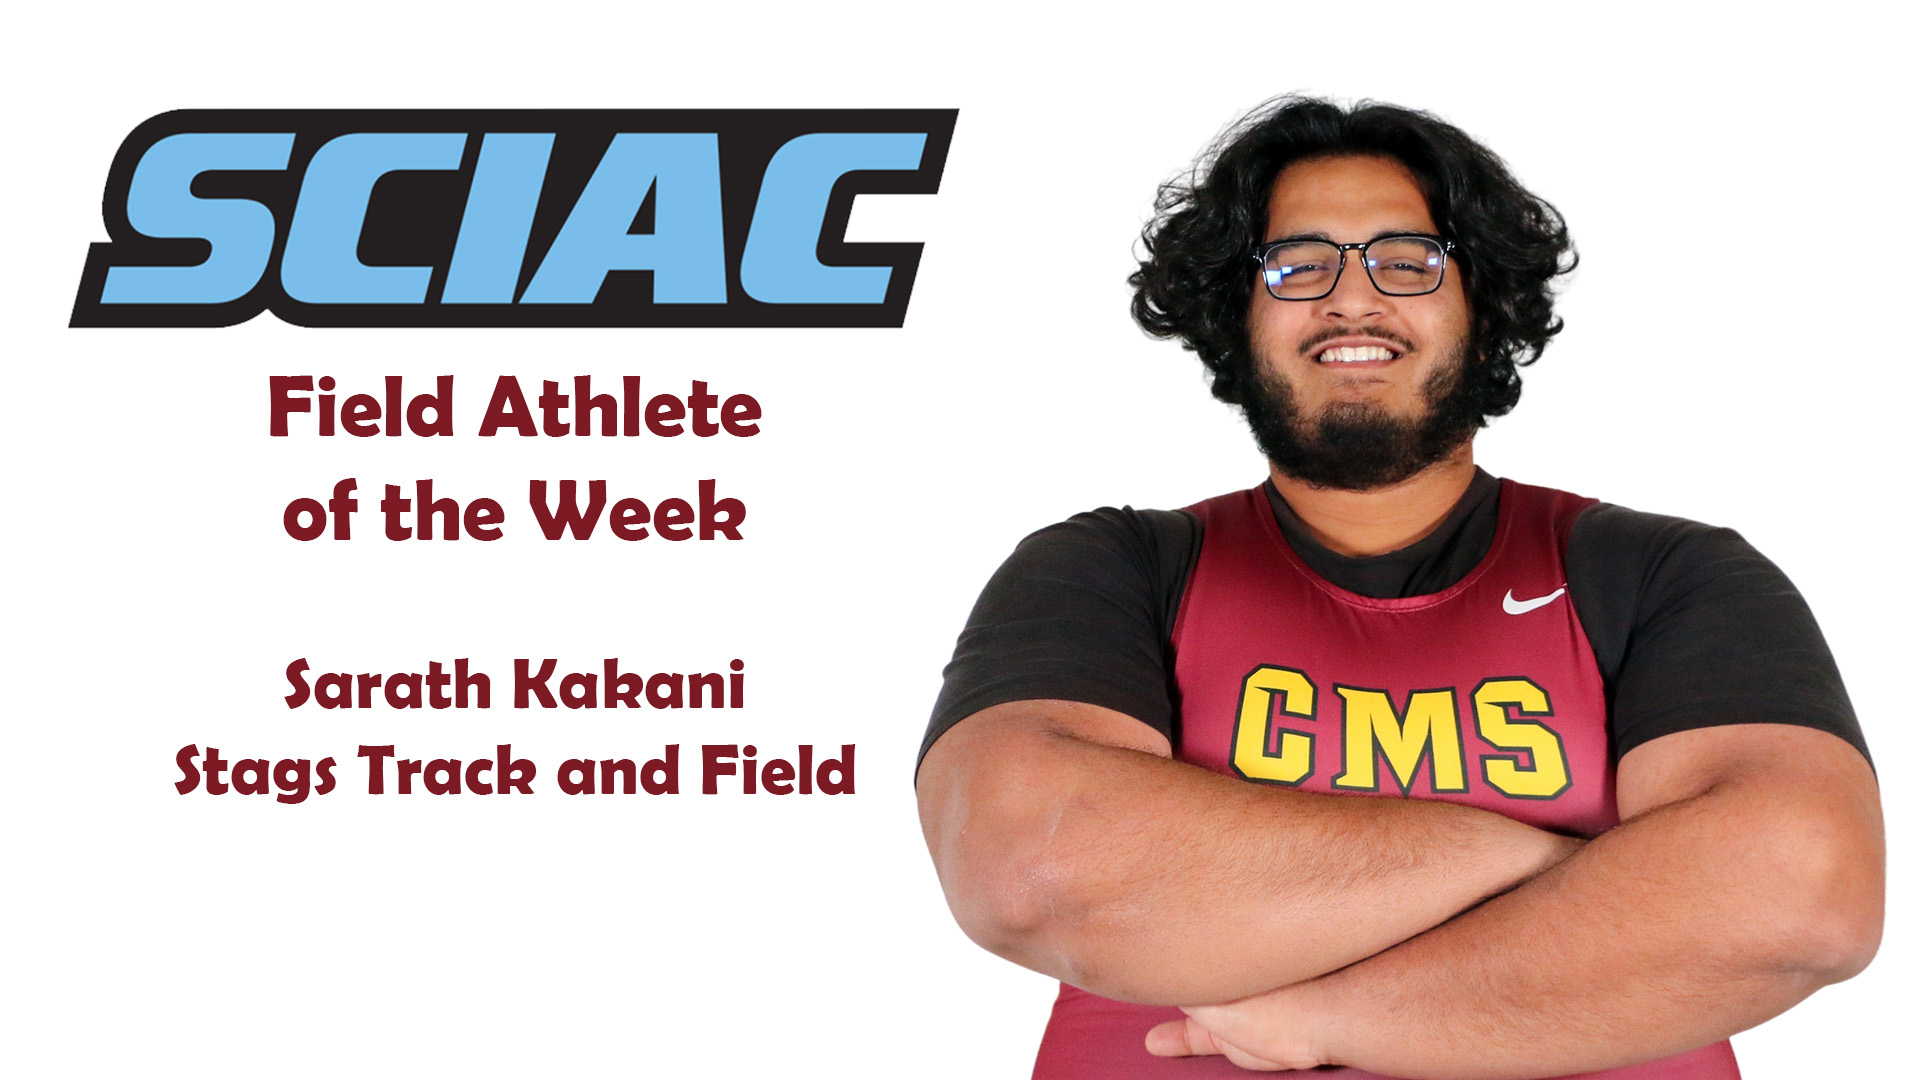 Sarath Kakani was honored by the SCIAC for the second time this year